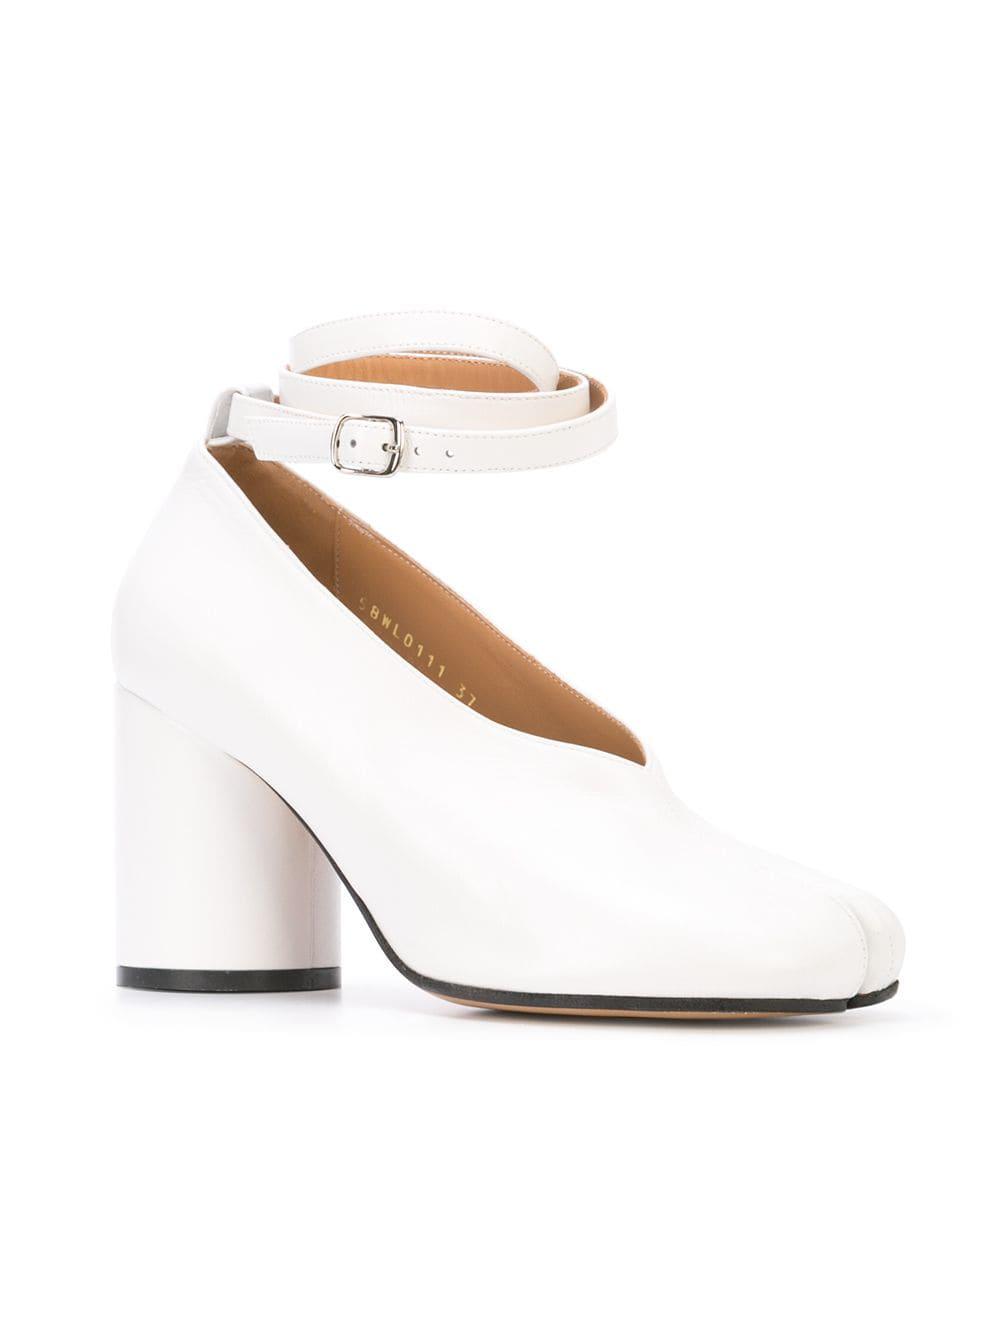 Maison Margiela Leather Tabi Mary Jane Pumps in White - Lyst